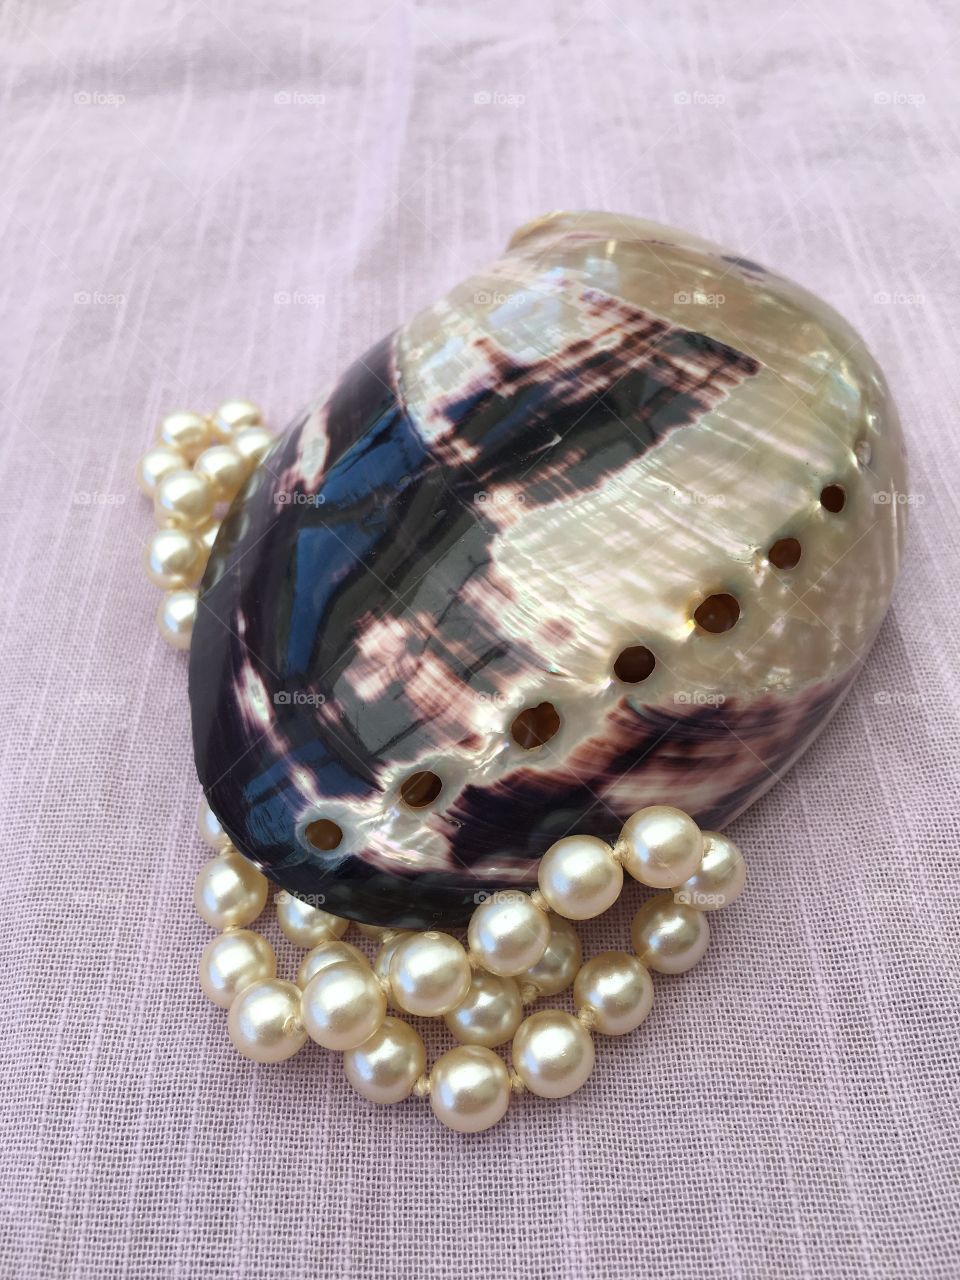 Shell and pearls